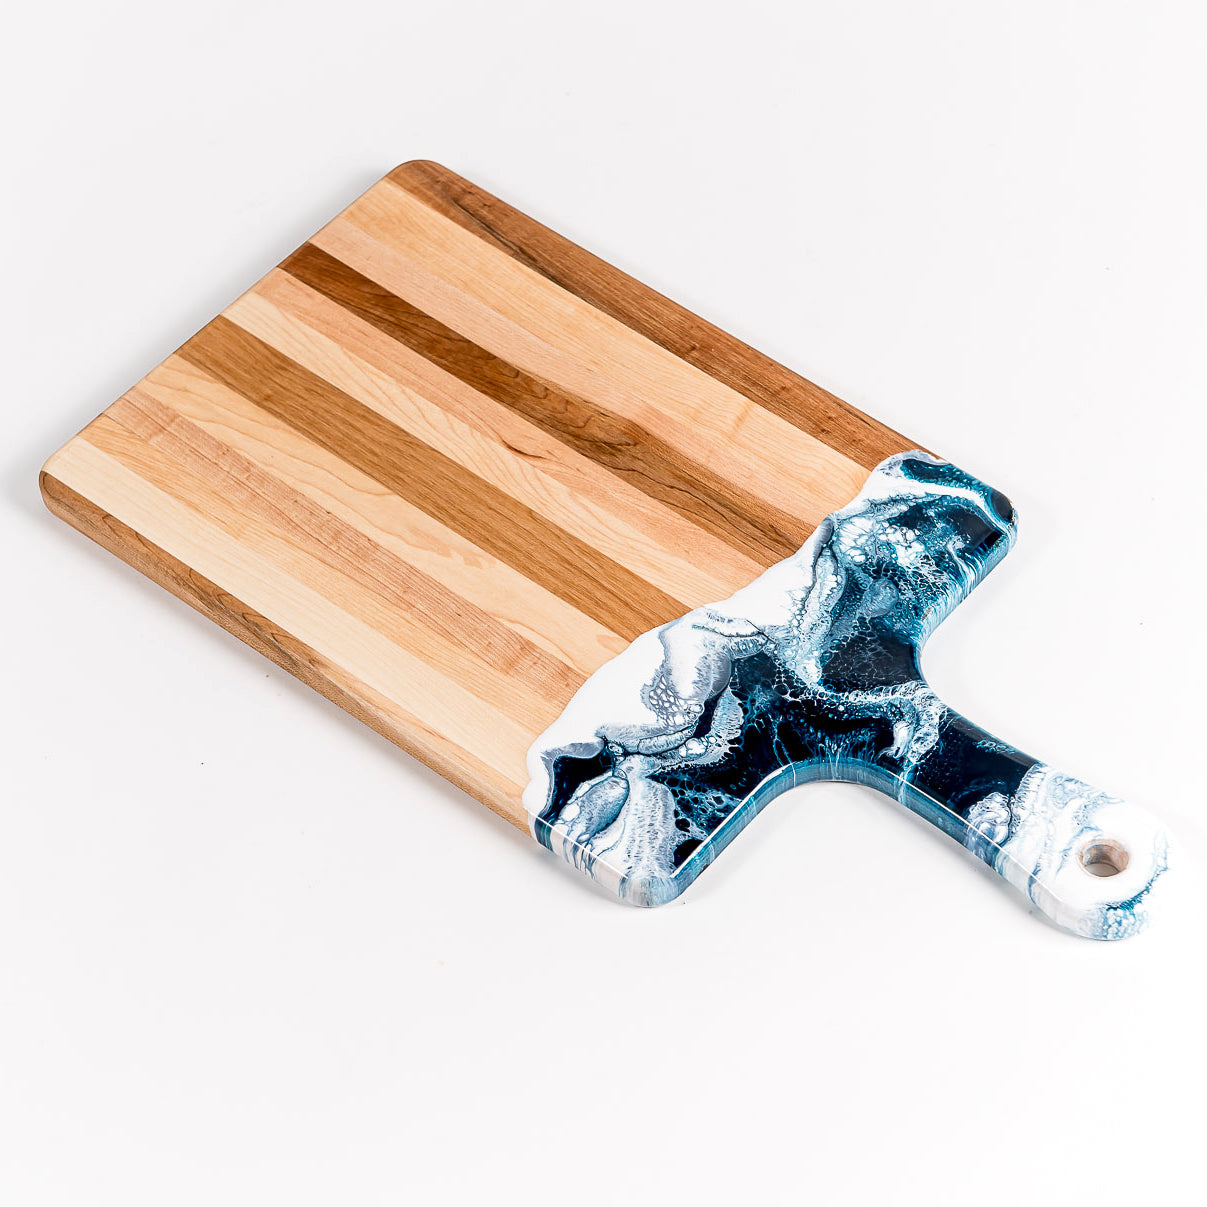 Acacia Resin Cheeseboard in navy and white.